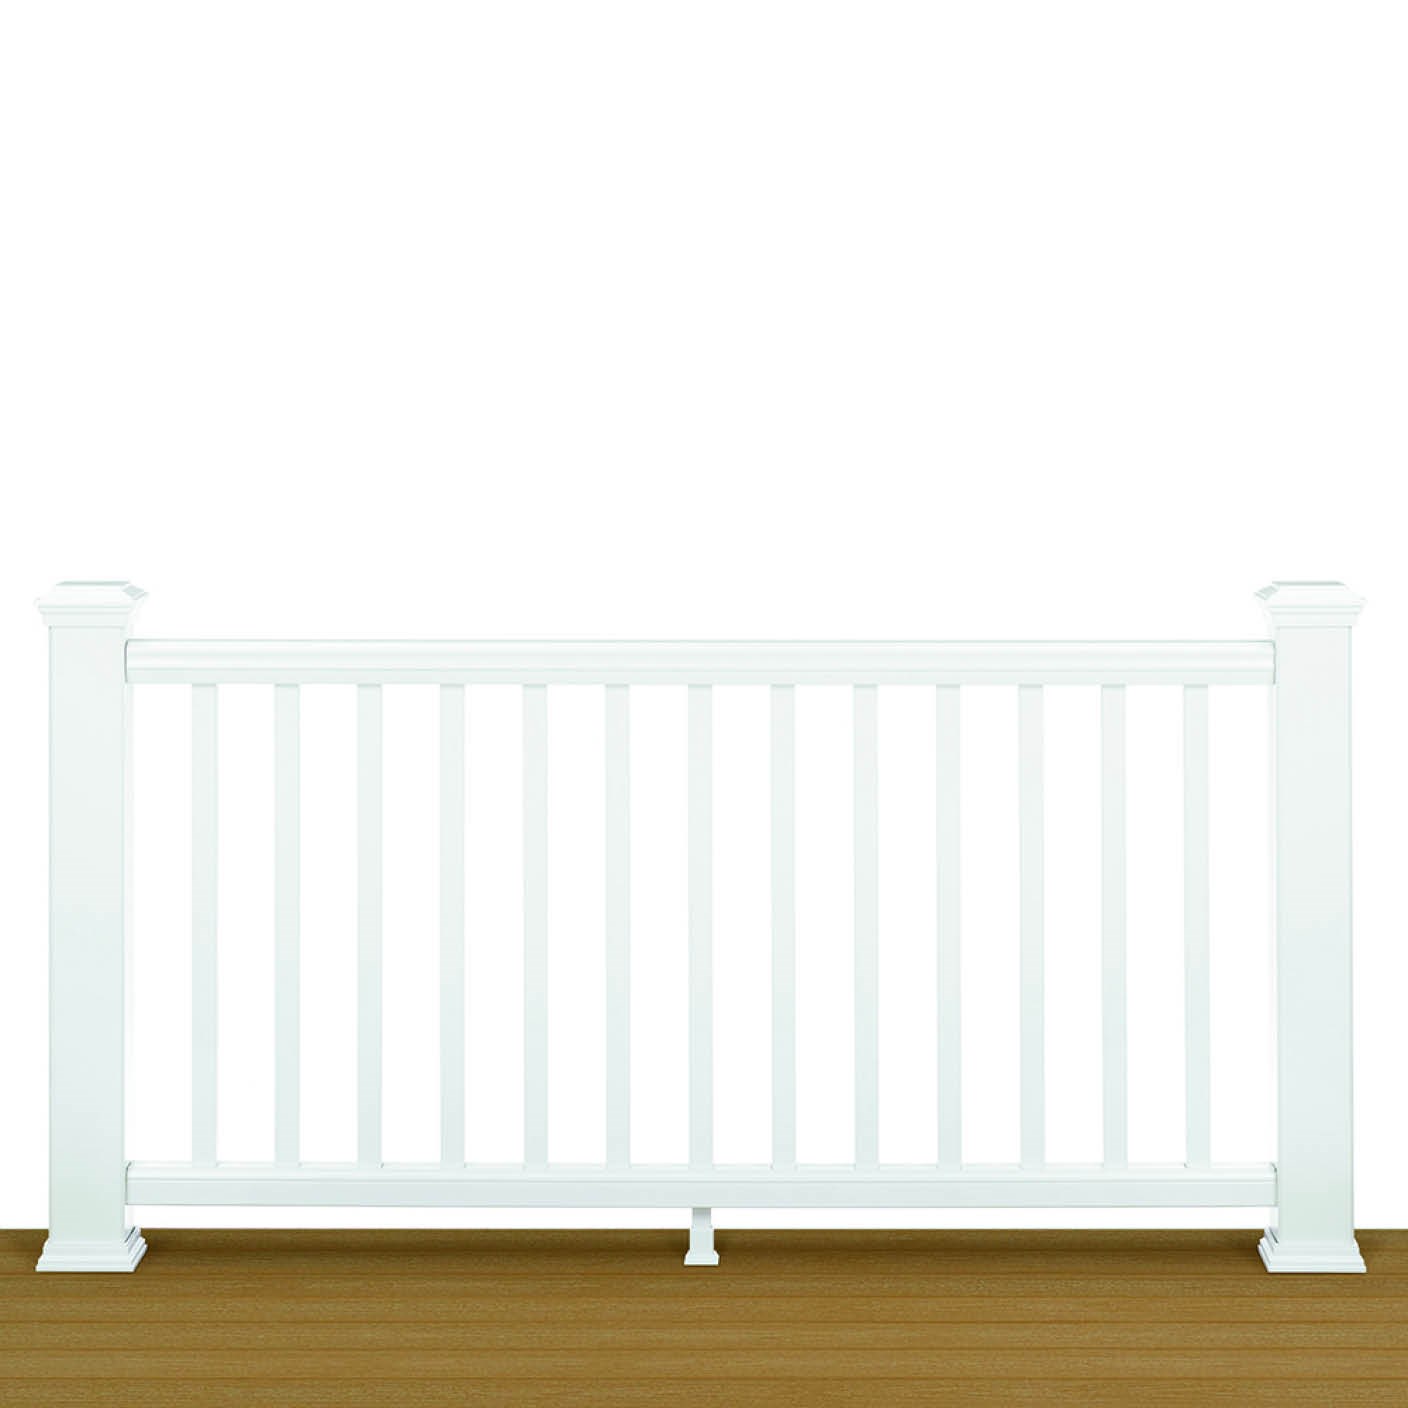 Trex® Transcend Rail Kit With Square Balusters Classic White 2.32 x 1.06m